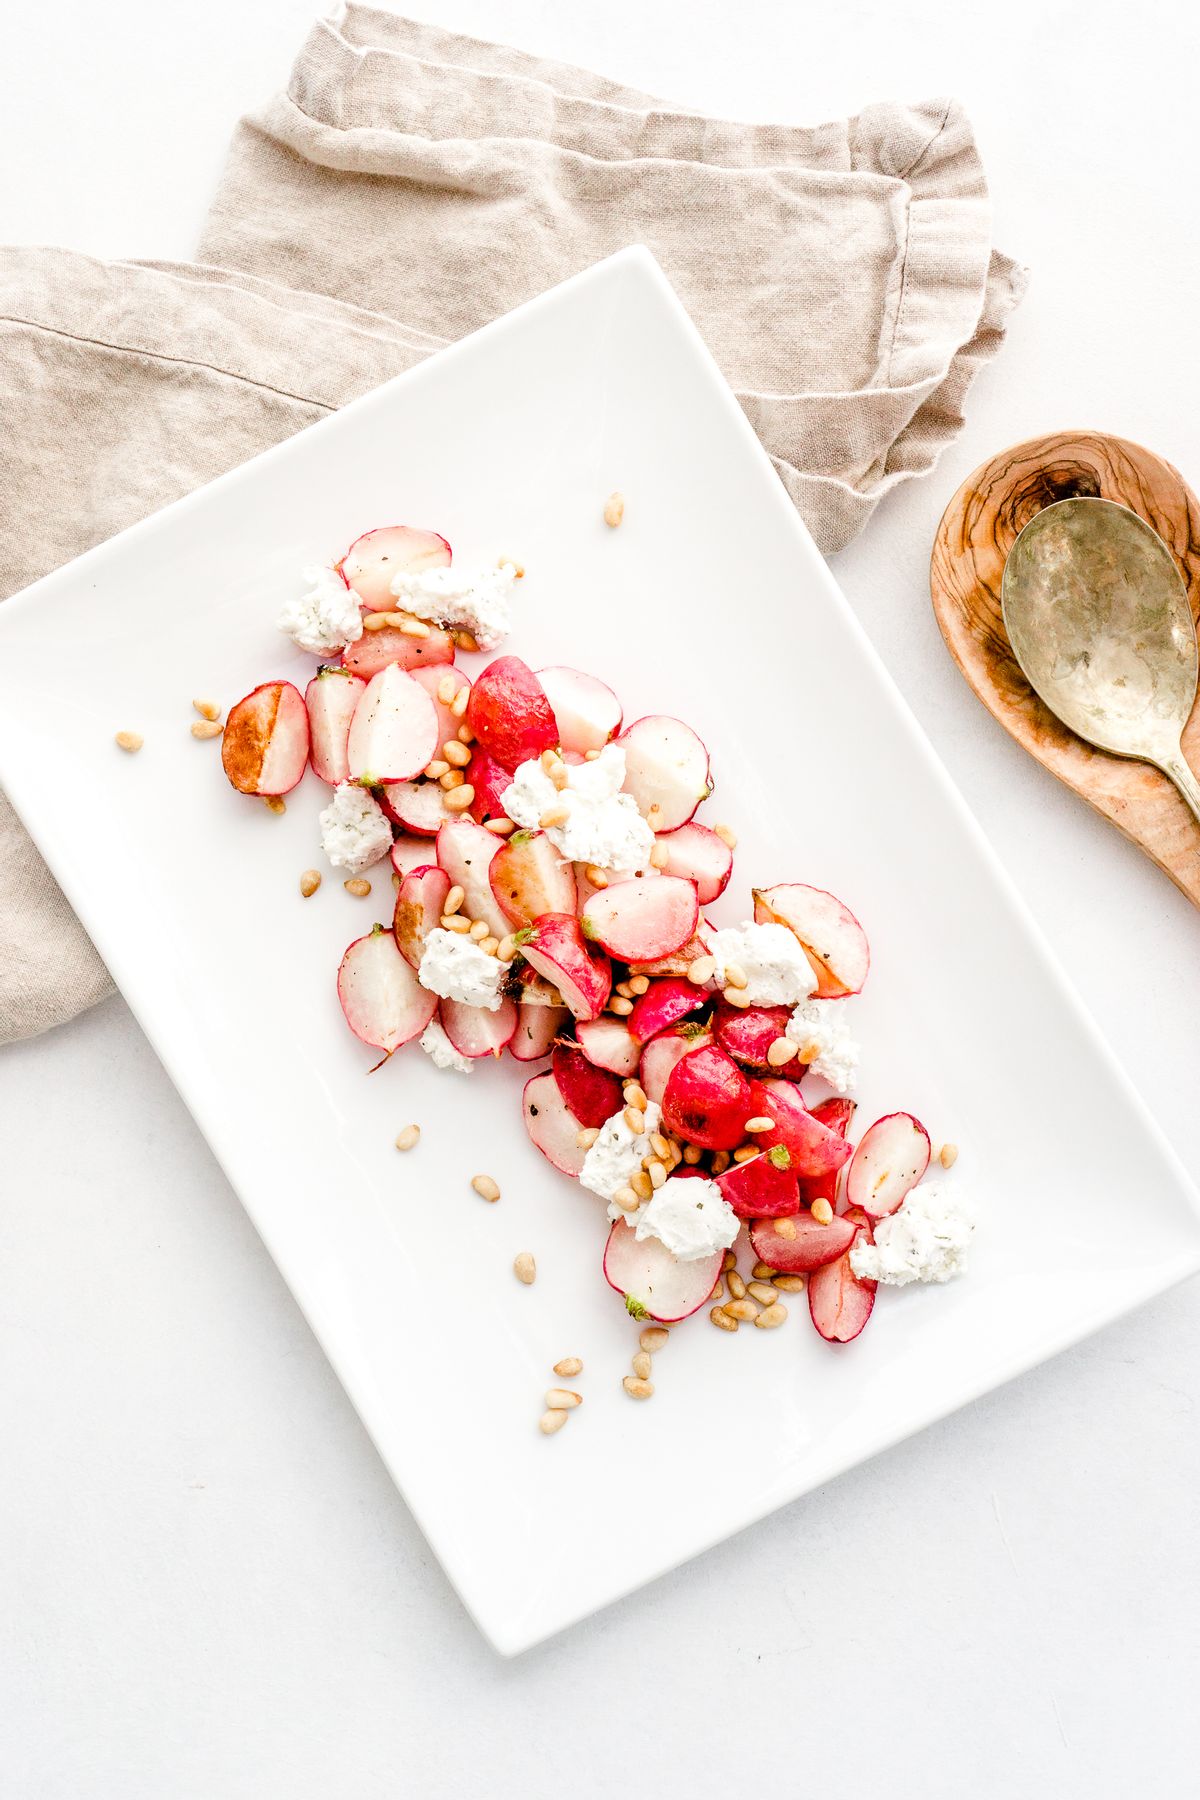 Keto Roasted Radishes with Herbed Goat Cheese and Toasted Pine Nuts